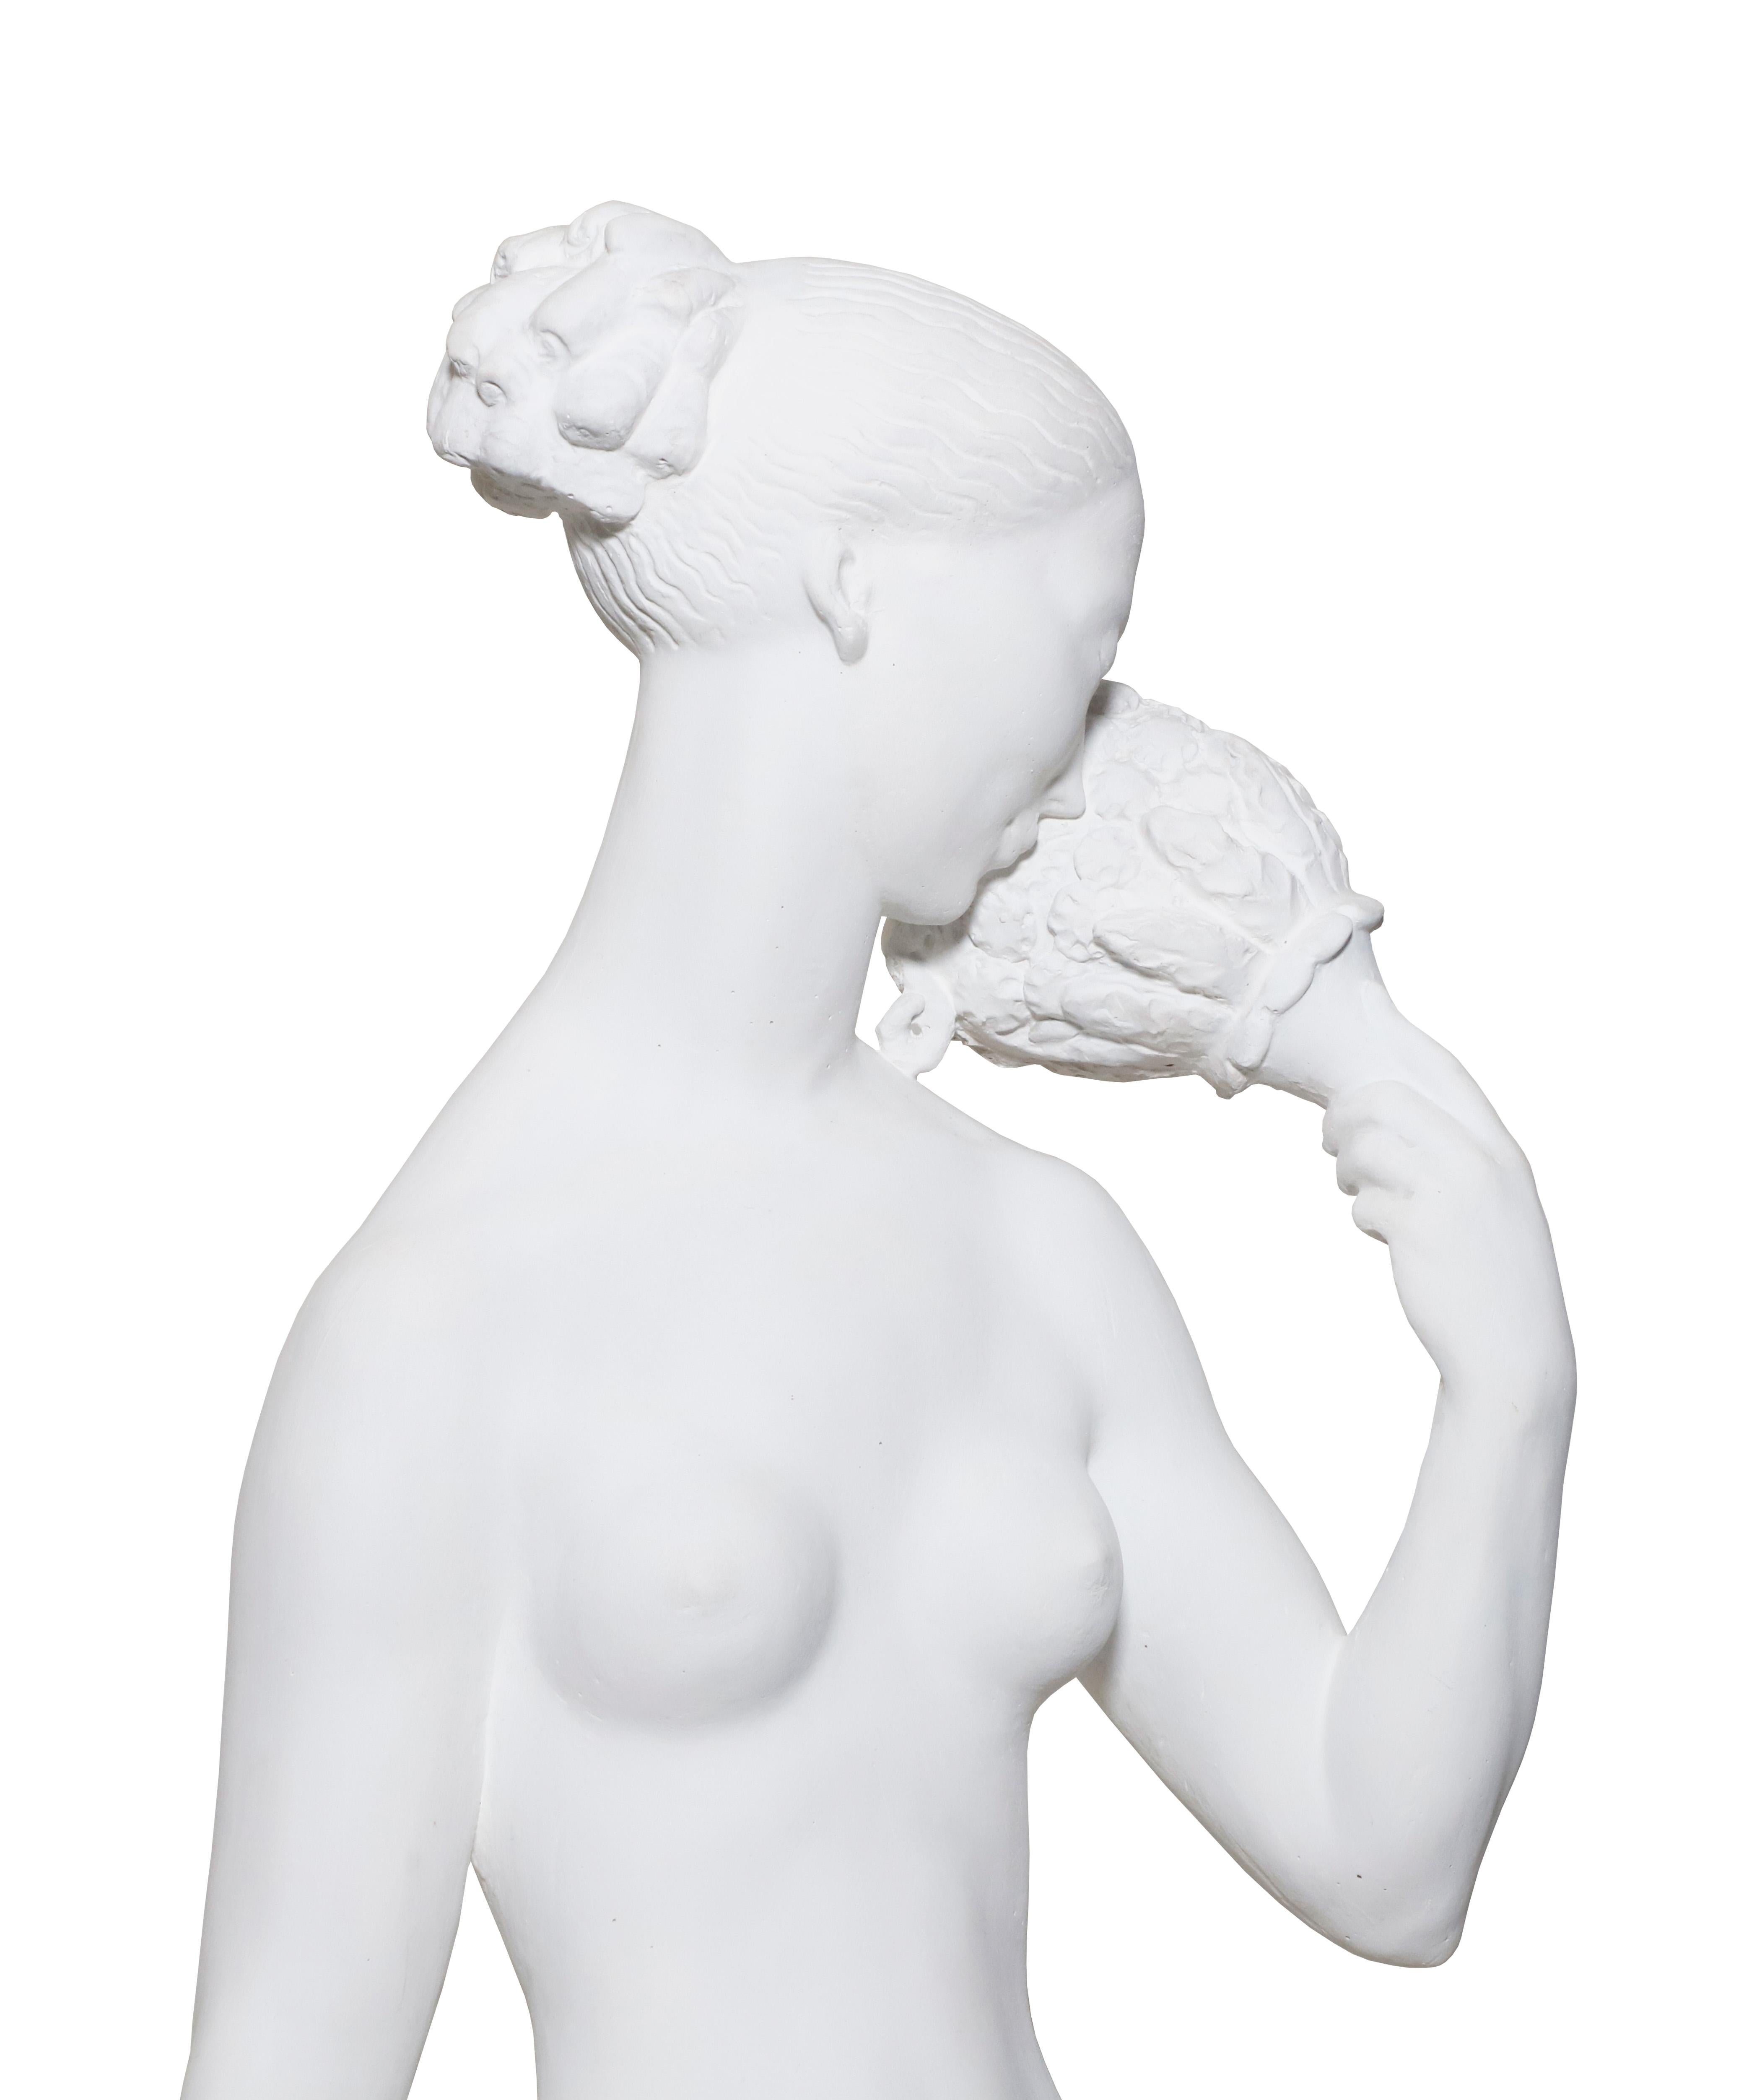 Plaster sculpture by the well known Swedish sculptor Carl Milles, circa 1920s. Detalailed sculpture of a naked women and a dog. 

Property from esteemed interior designer Juan Montoya. Juan Montoya is one of the most acclaimed and prolific